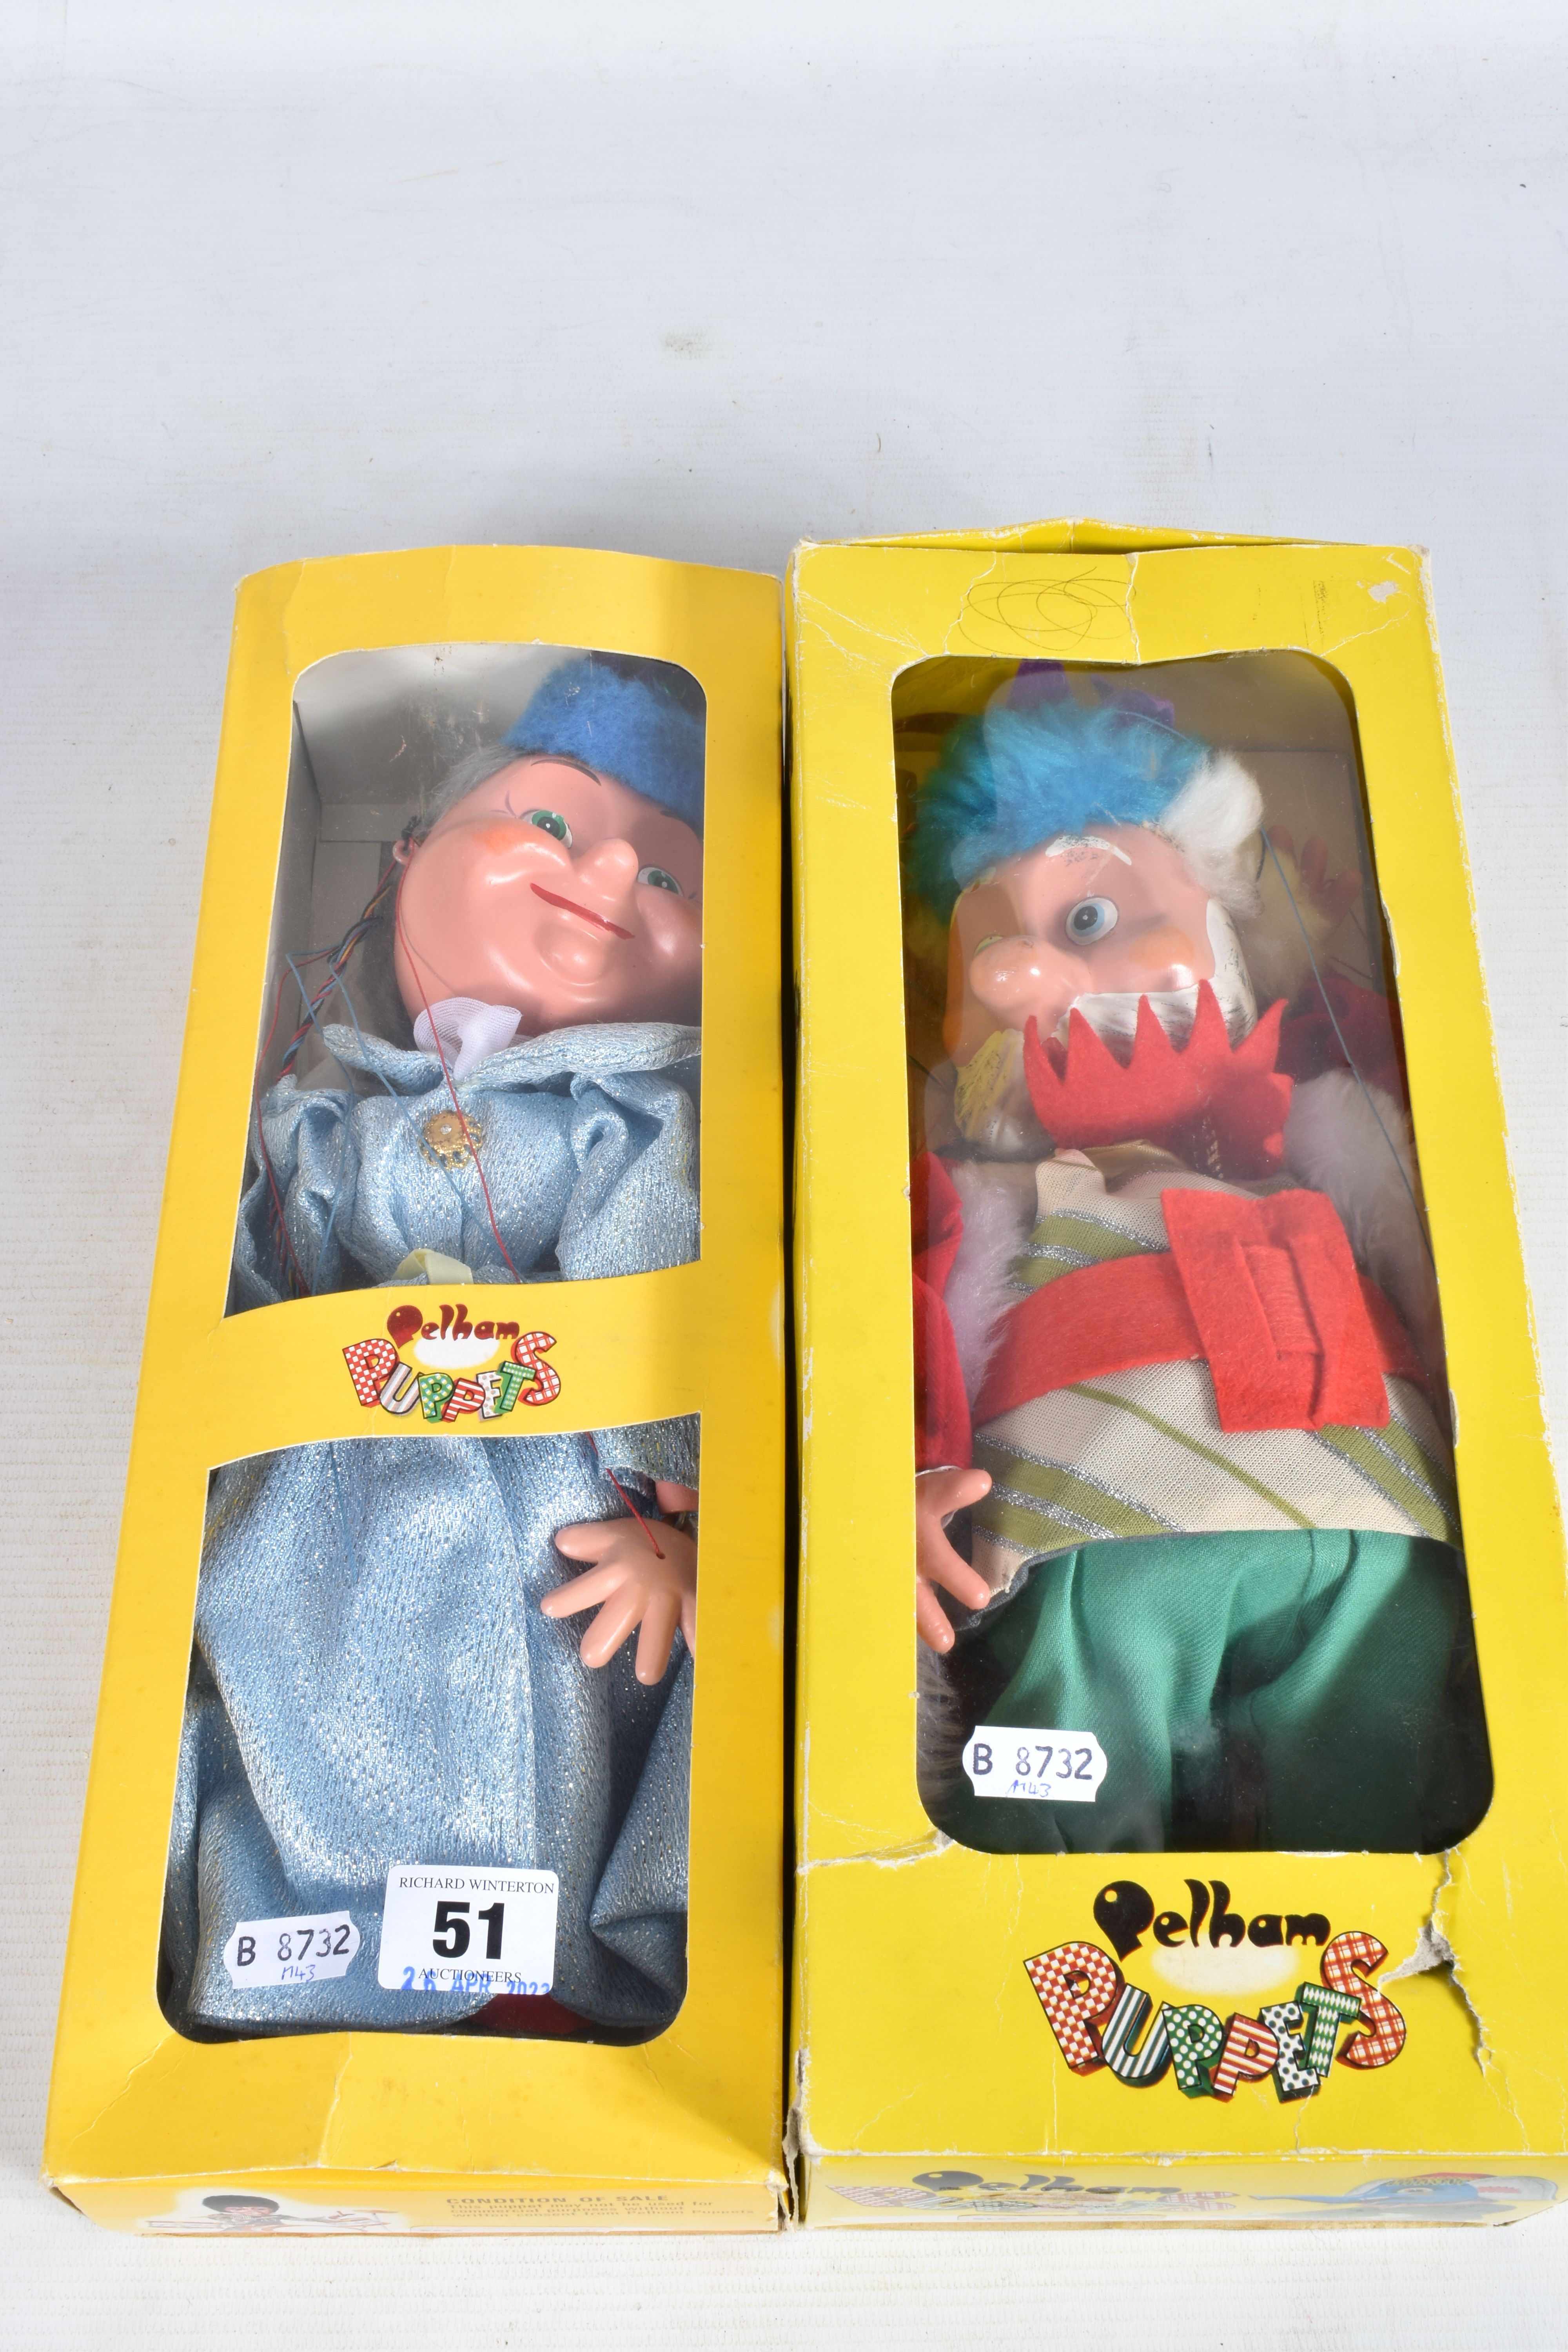 TWO BOXED PELHAM SL63 PUPPETS, Queen and King, versions without label to clothing, both appear